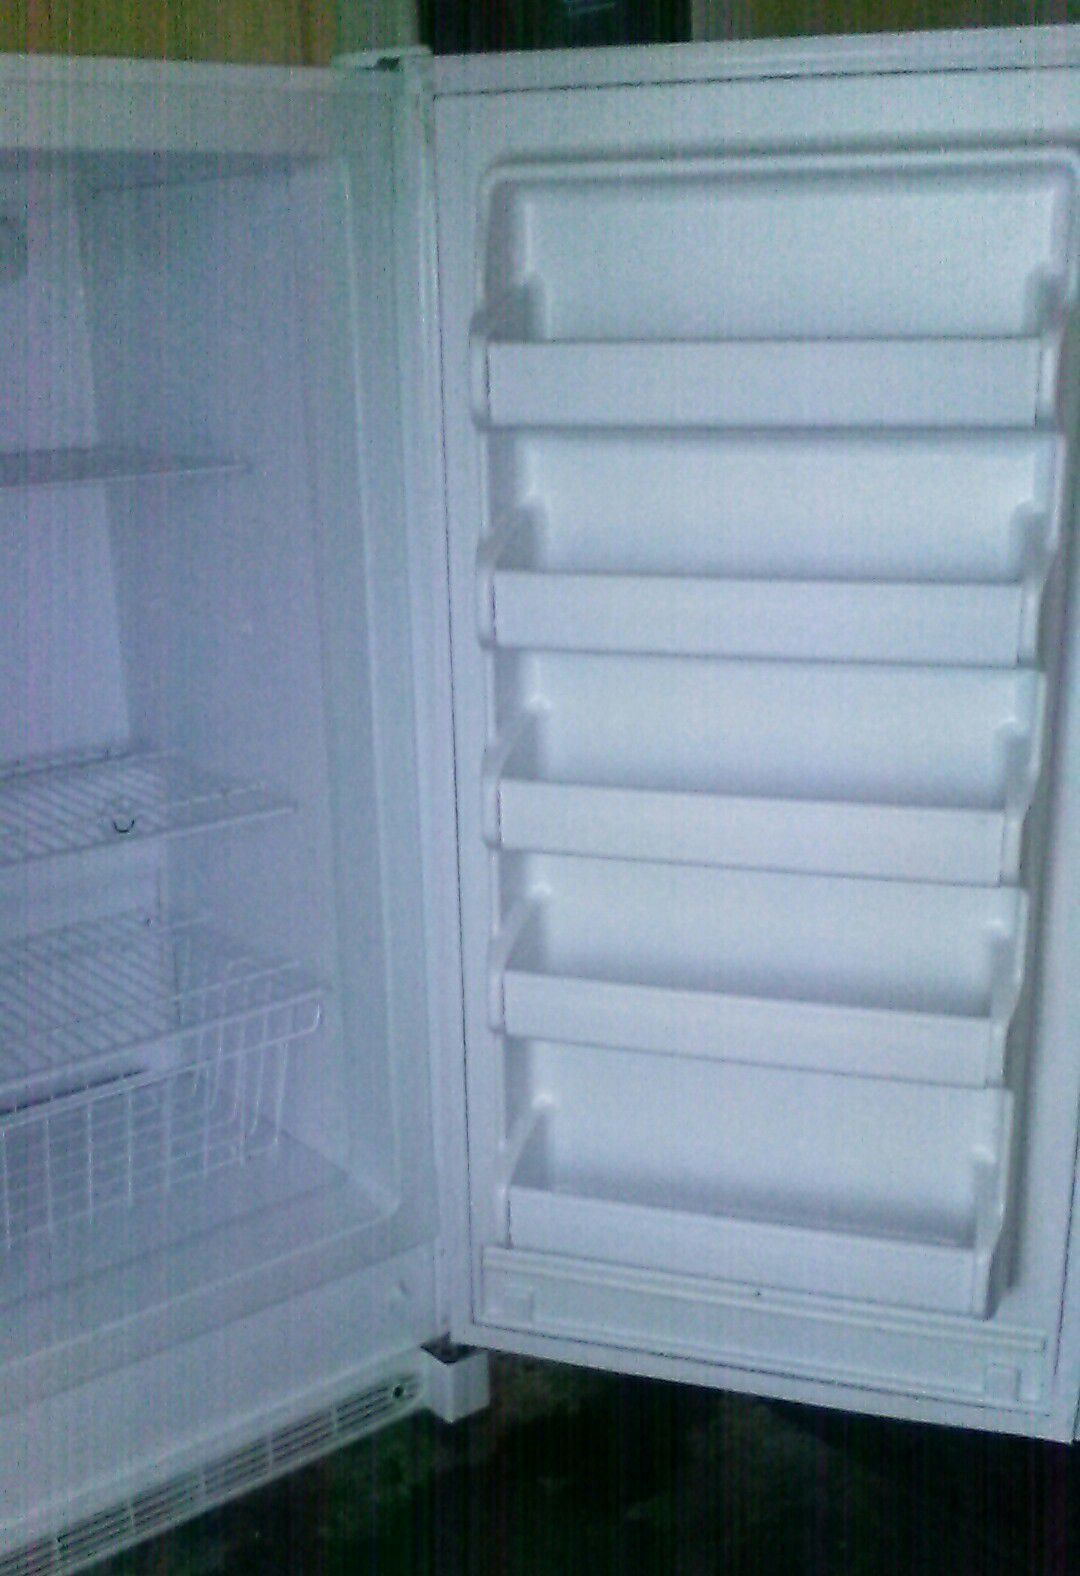 Kenmore White 5 Cu Ft Upright Freezer for Sale in Bonney Lake, WA - OfferUp